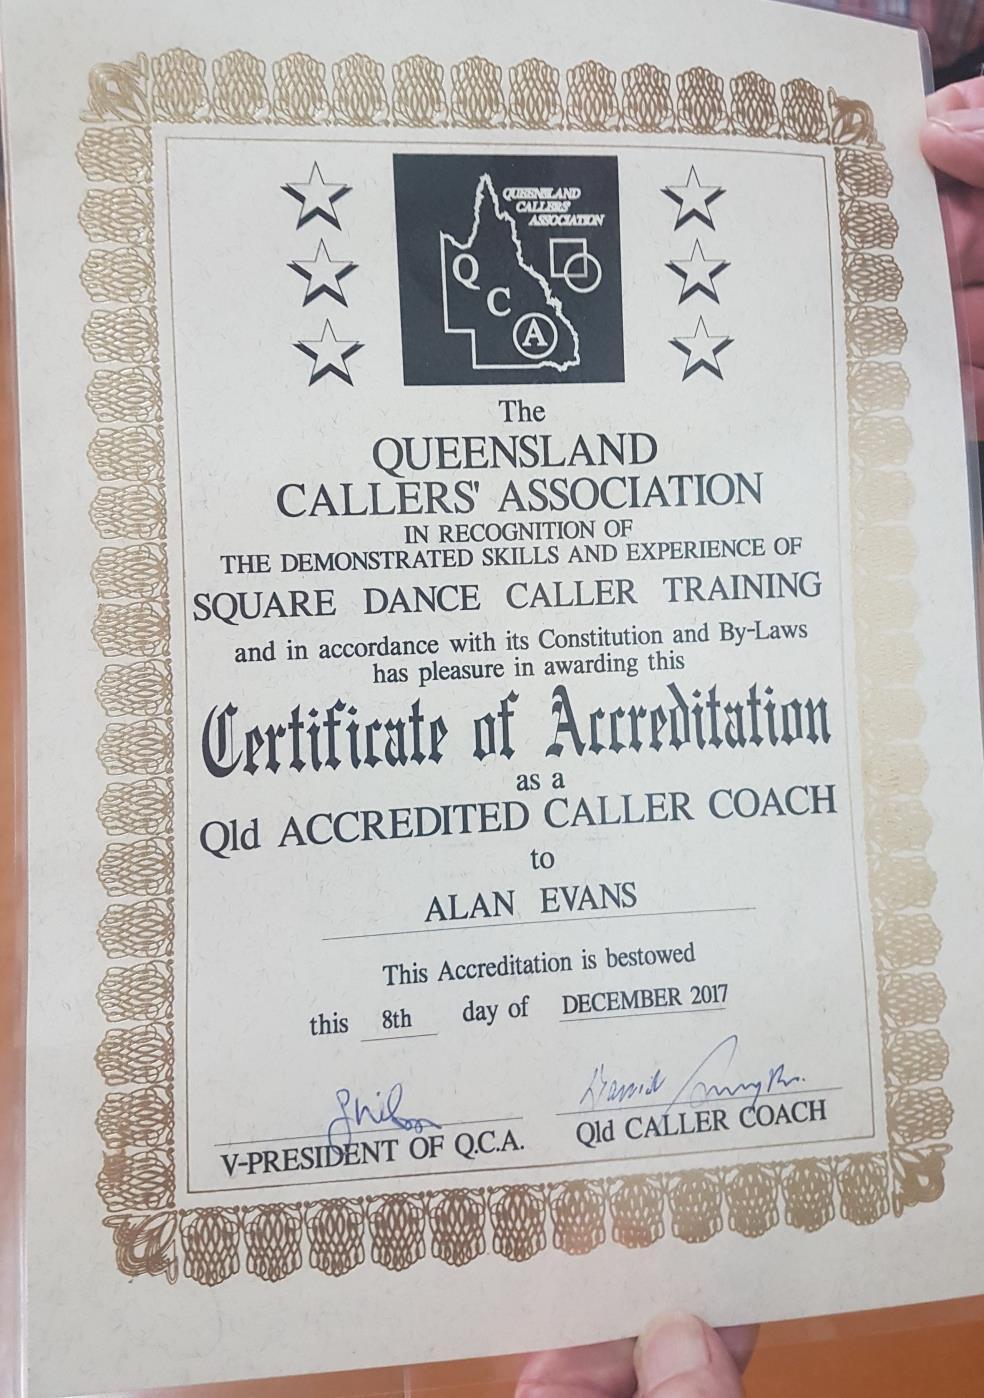 Attachment 4: QCA CALLER COACH ACCREDITATION ALAN EVANS We, the staff at Behind The Mike, wish to offer our congratulations and well deserved acknowledgement to Alan Evans on this achievement.